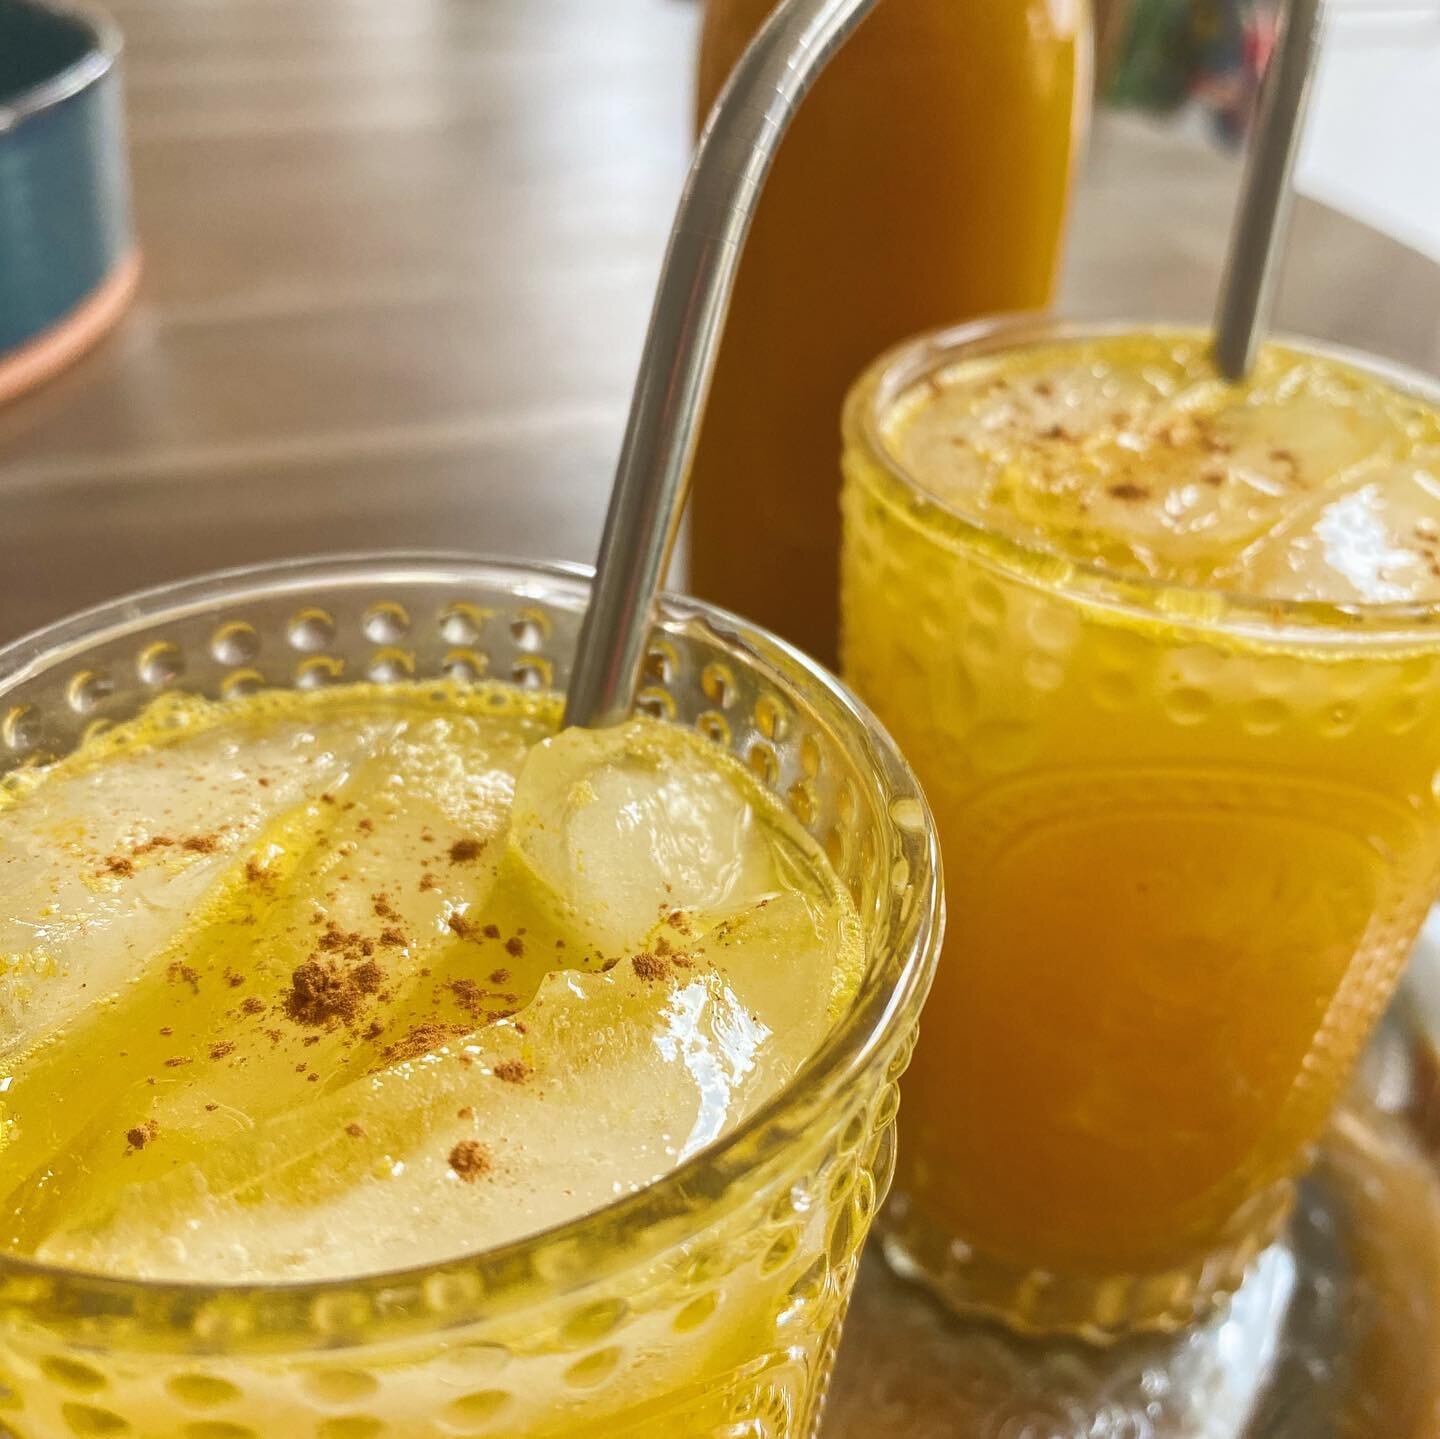 Turmeric elixir time

Who says turmeric has to be consumed as a latte in front of a fireplace? Why not in a mocktail, making it a healing elixir all in one! Perfect for the warmer weather. 😀 Superfood spices &amp; anti inflammatory turmeric, with a 